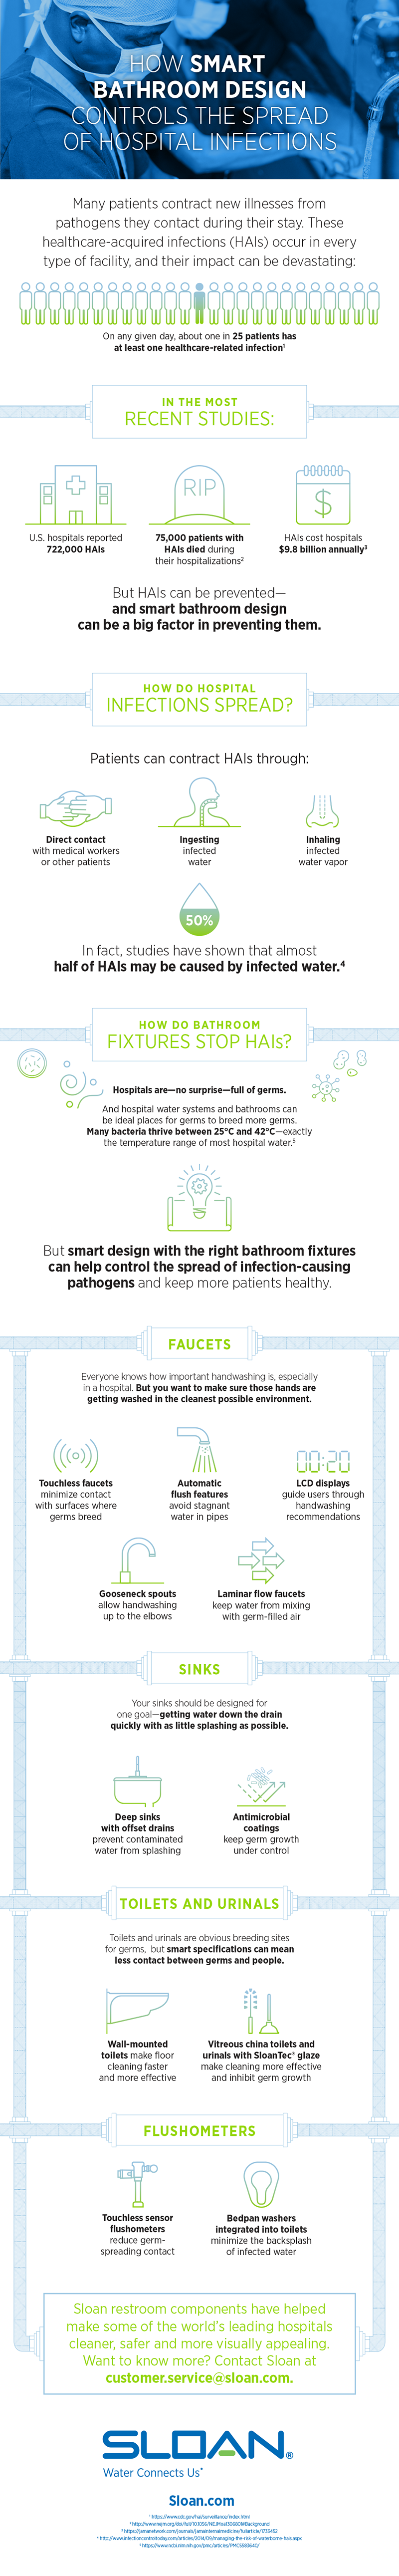 How Smart Bathroom Design Controls the Spread of Hospital Infections